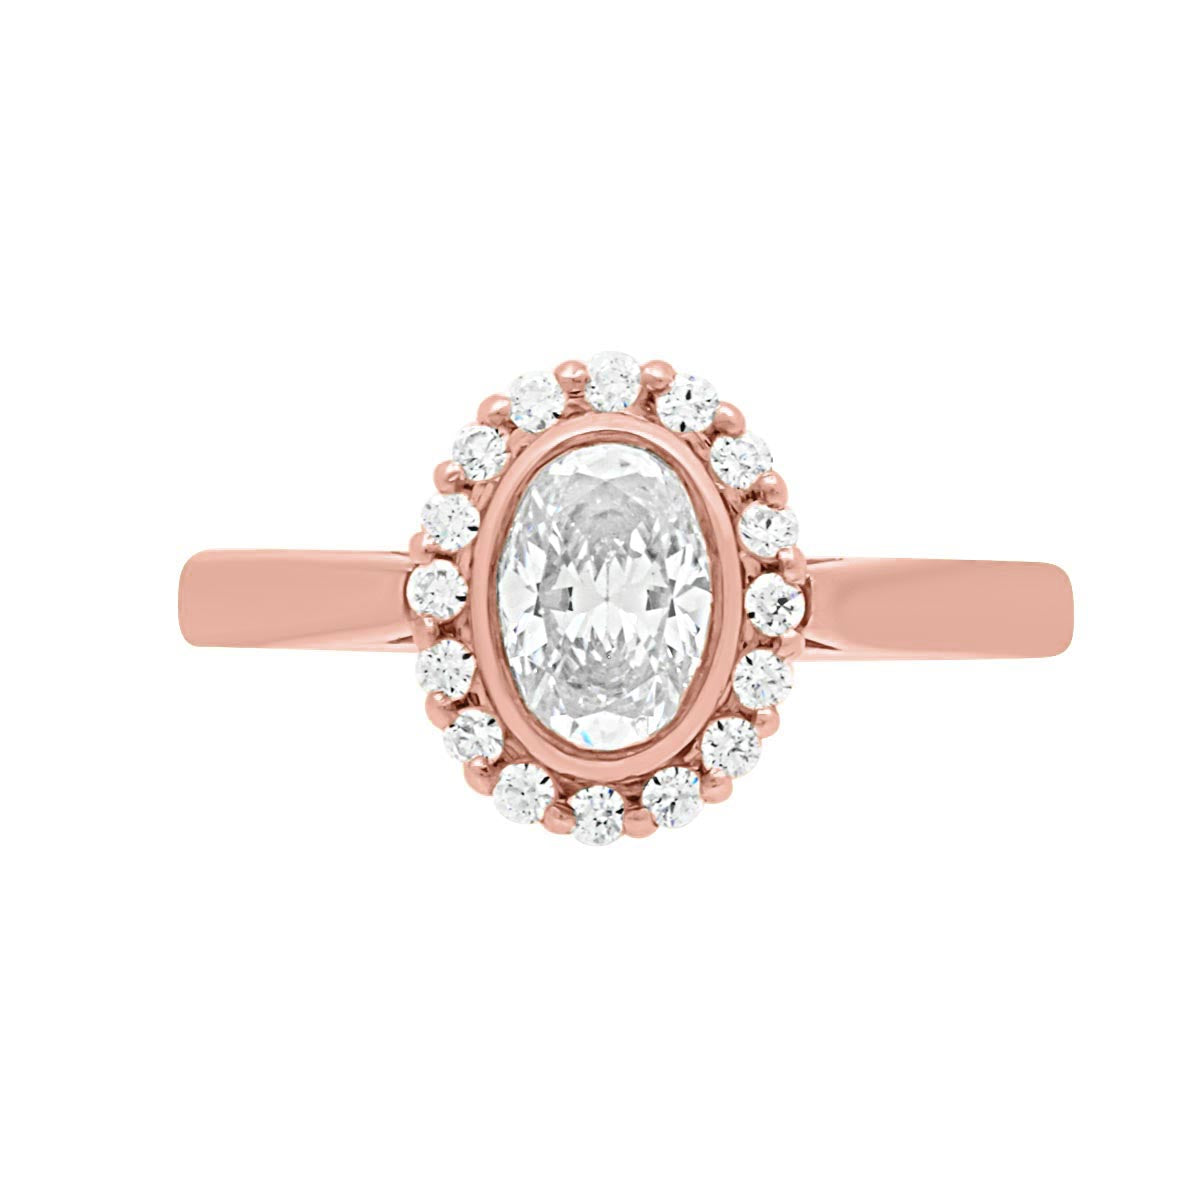  Oval Halo Diamond Ring in rose gold